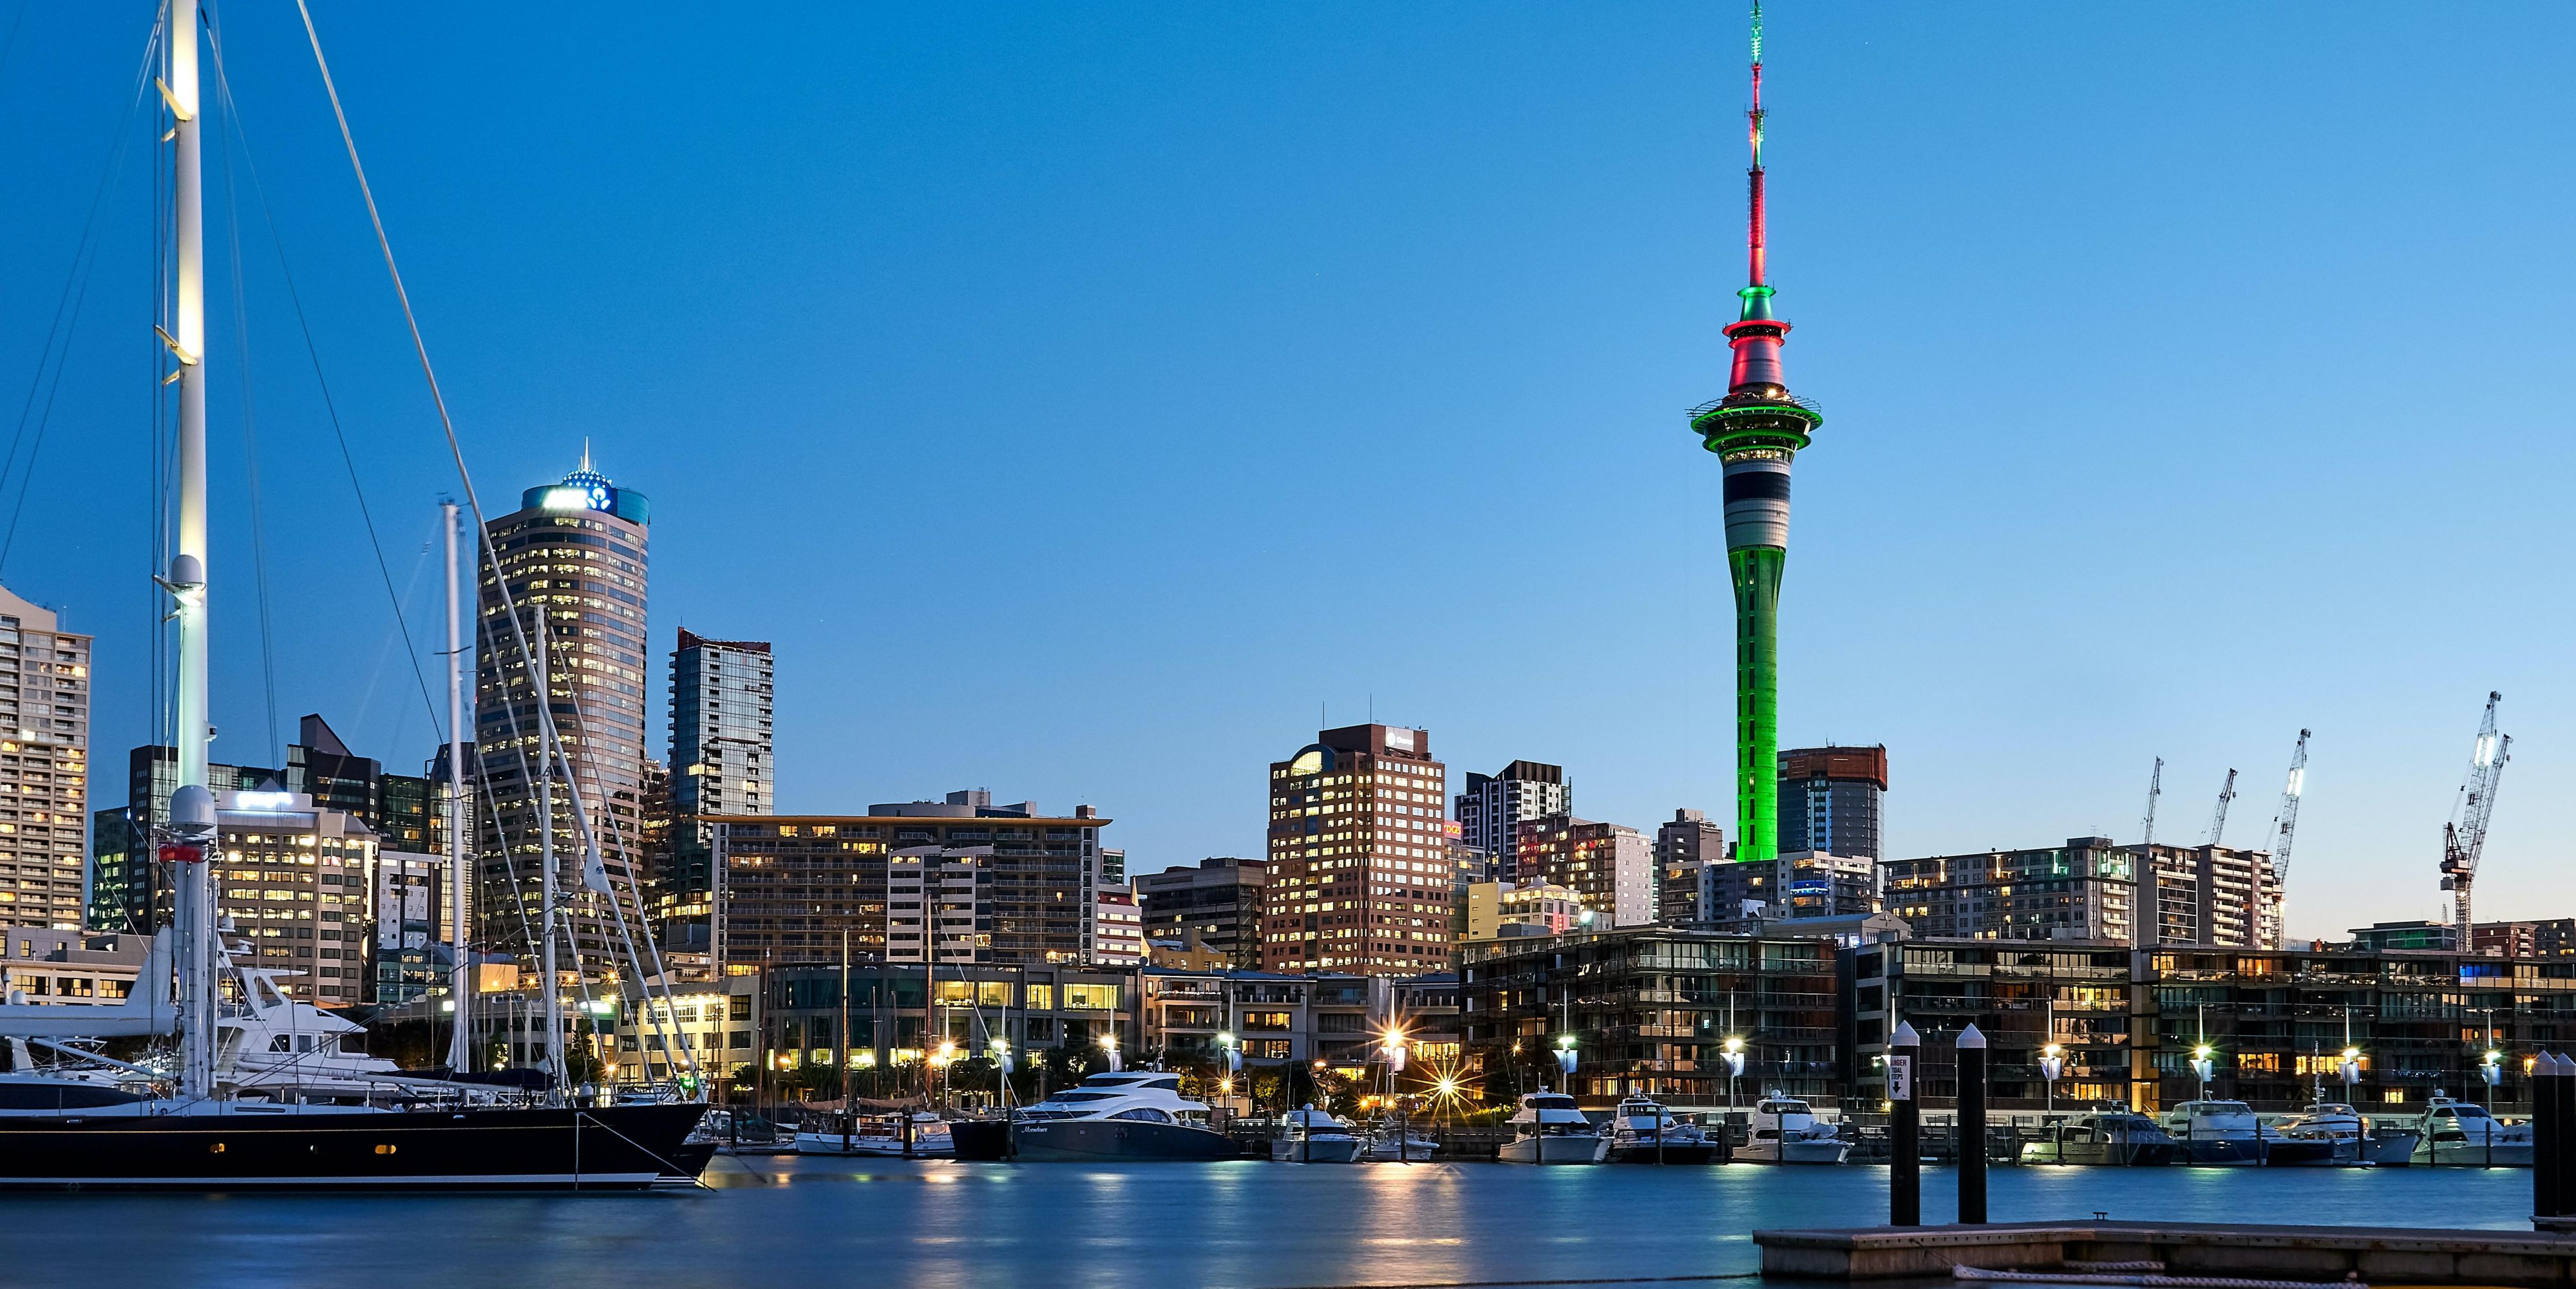 Ideally located on the corner of Wyndham and Albert Street, the new Holiday Inn Express Auckland City Centre is close to CBD attractions. A short stroll away is Commercial Bay, a one-stop shop for dining and entertainment. Take in Auckland's skyline from the Sky Tower or visit the Auckland Art Gallery and immerse yourself in its art collection.